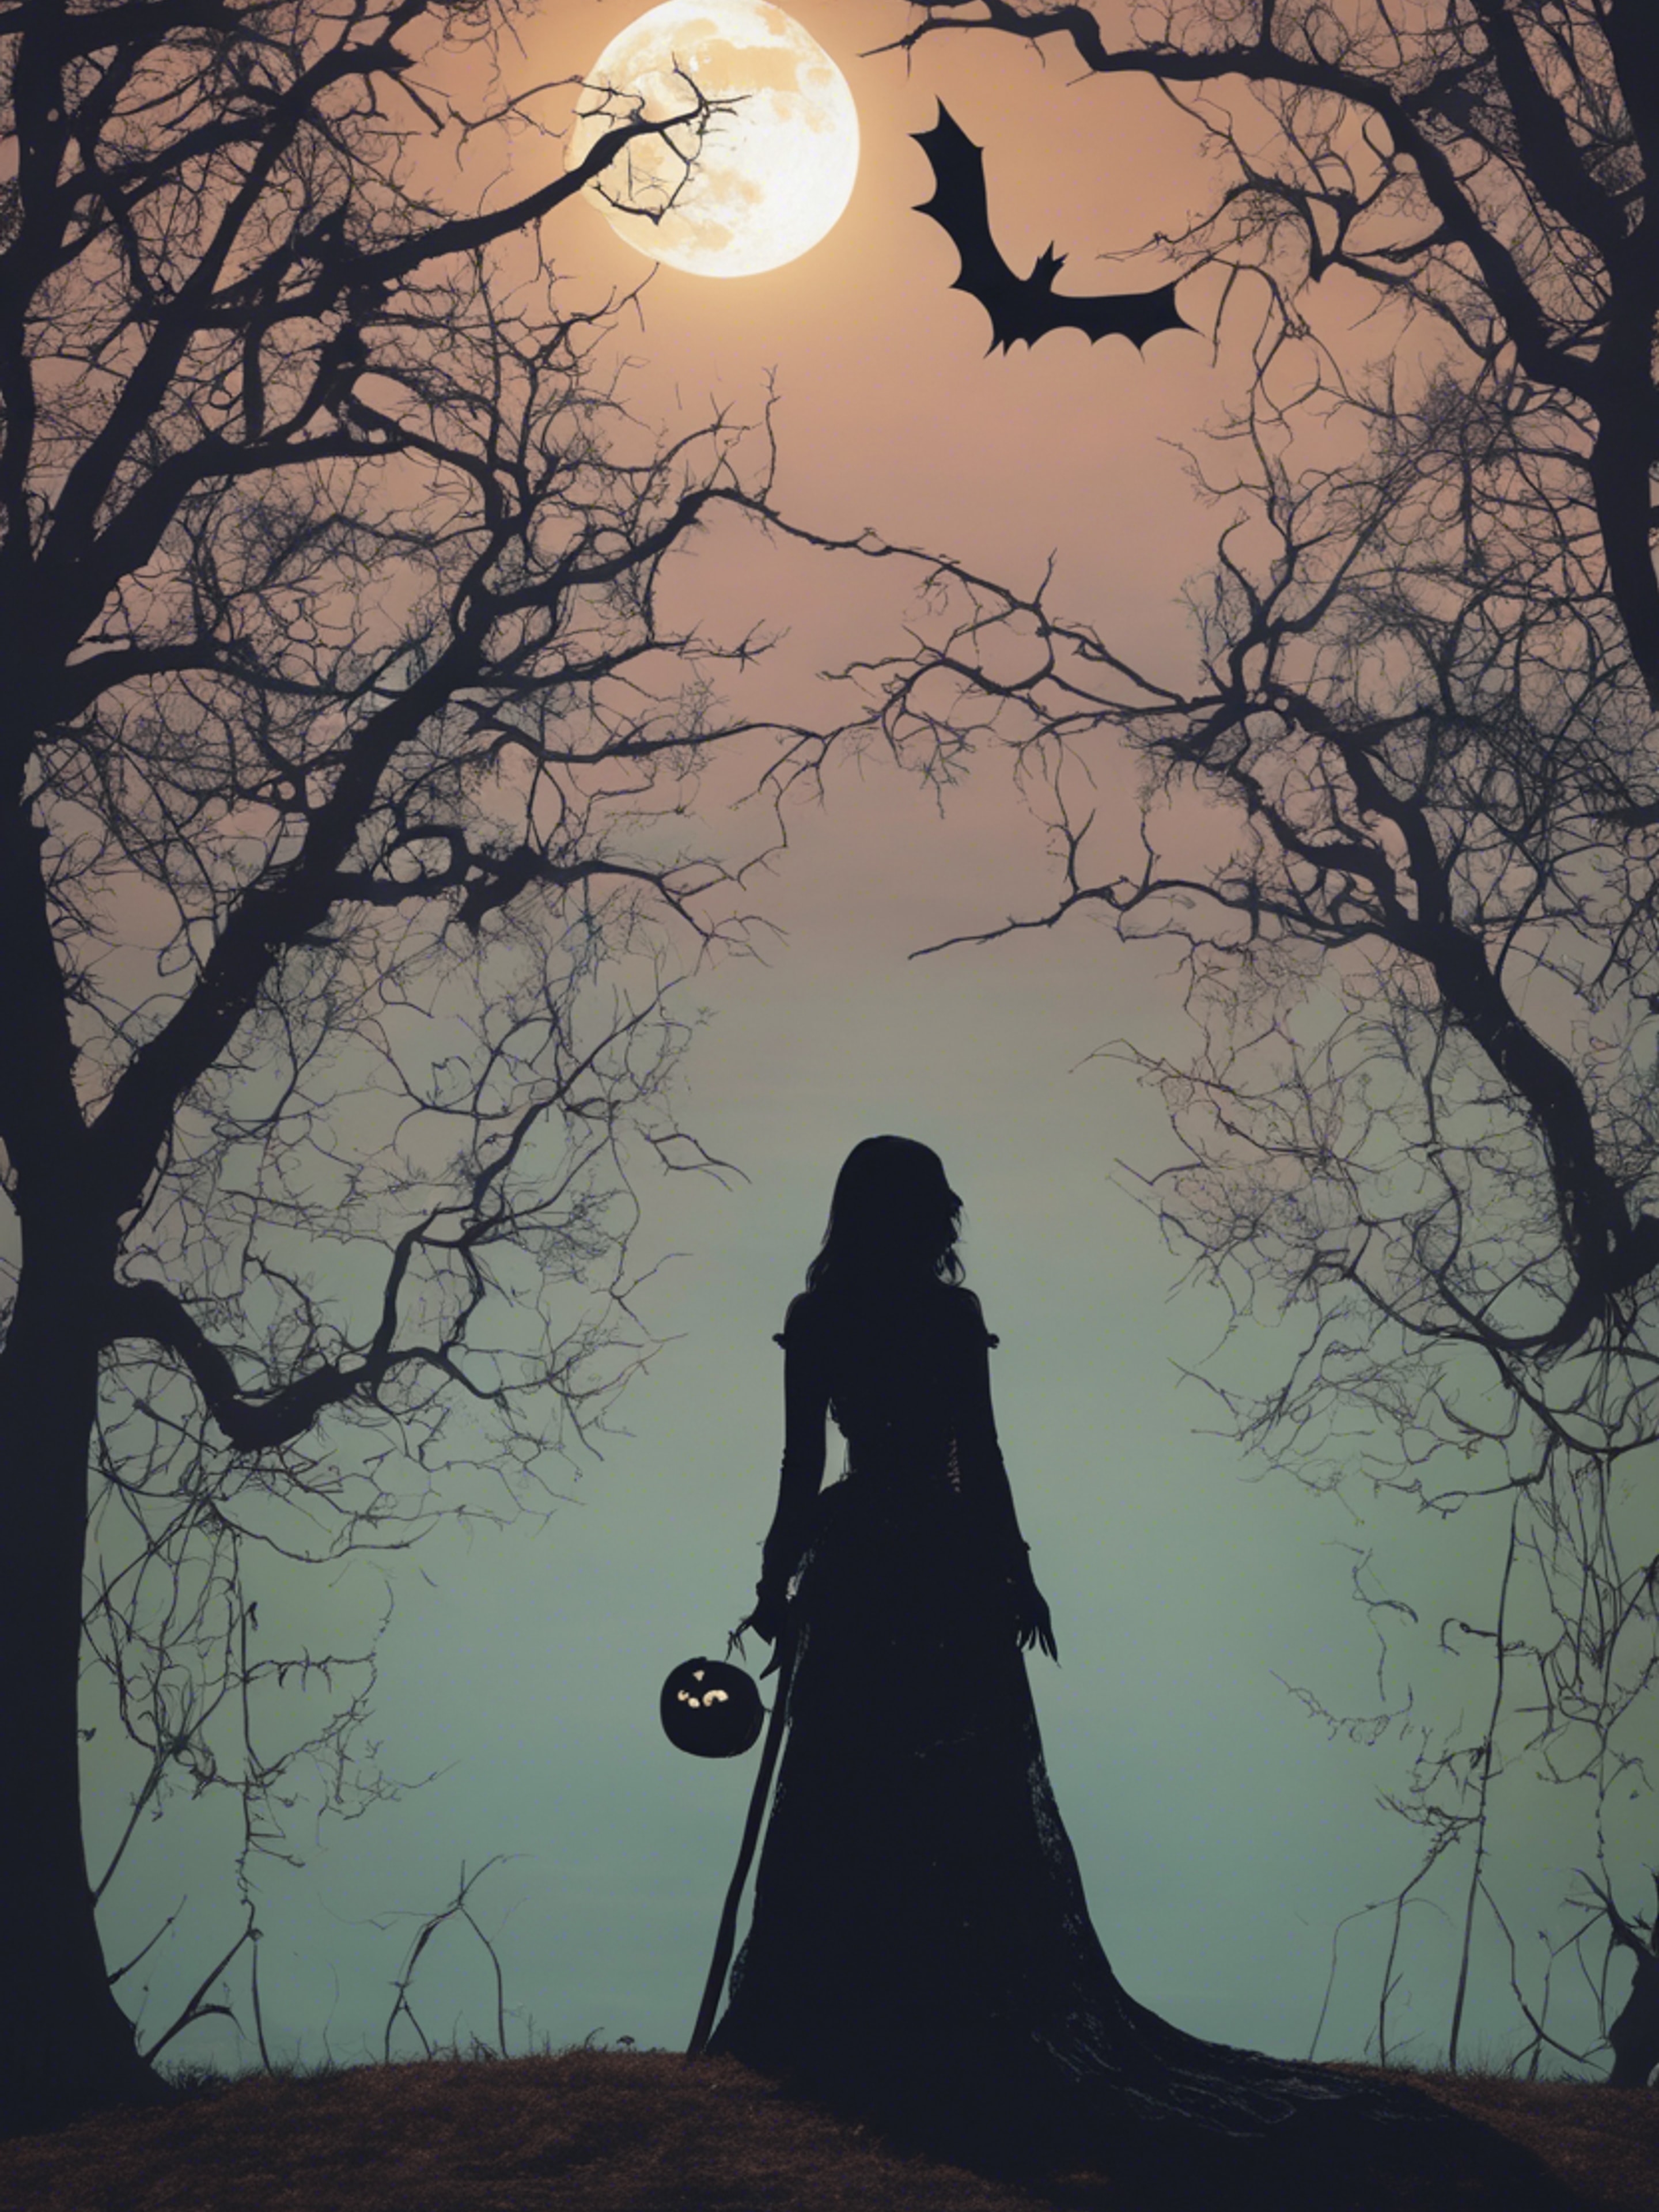 A pastel gothic art piece featuring a halloween-inspired silhouette against a full moon. Валлпапер[0c56d77b25284c4fbd1c]